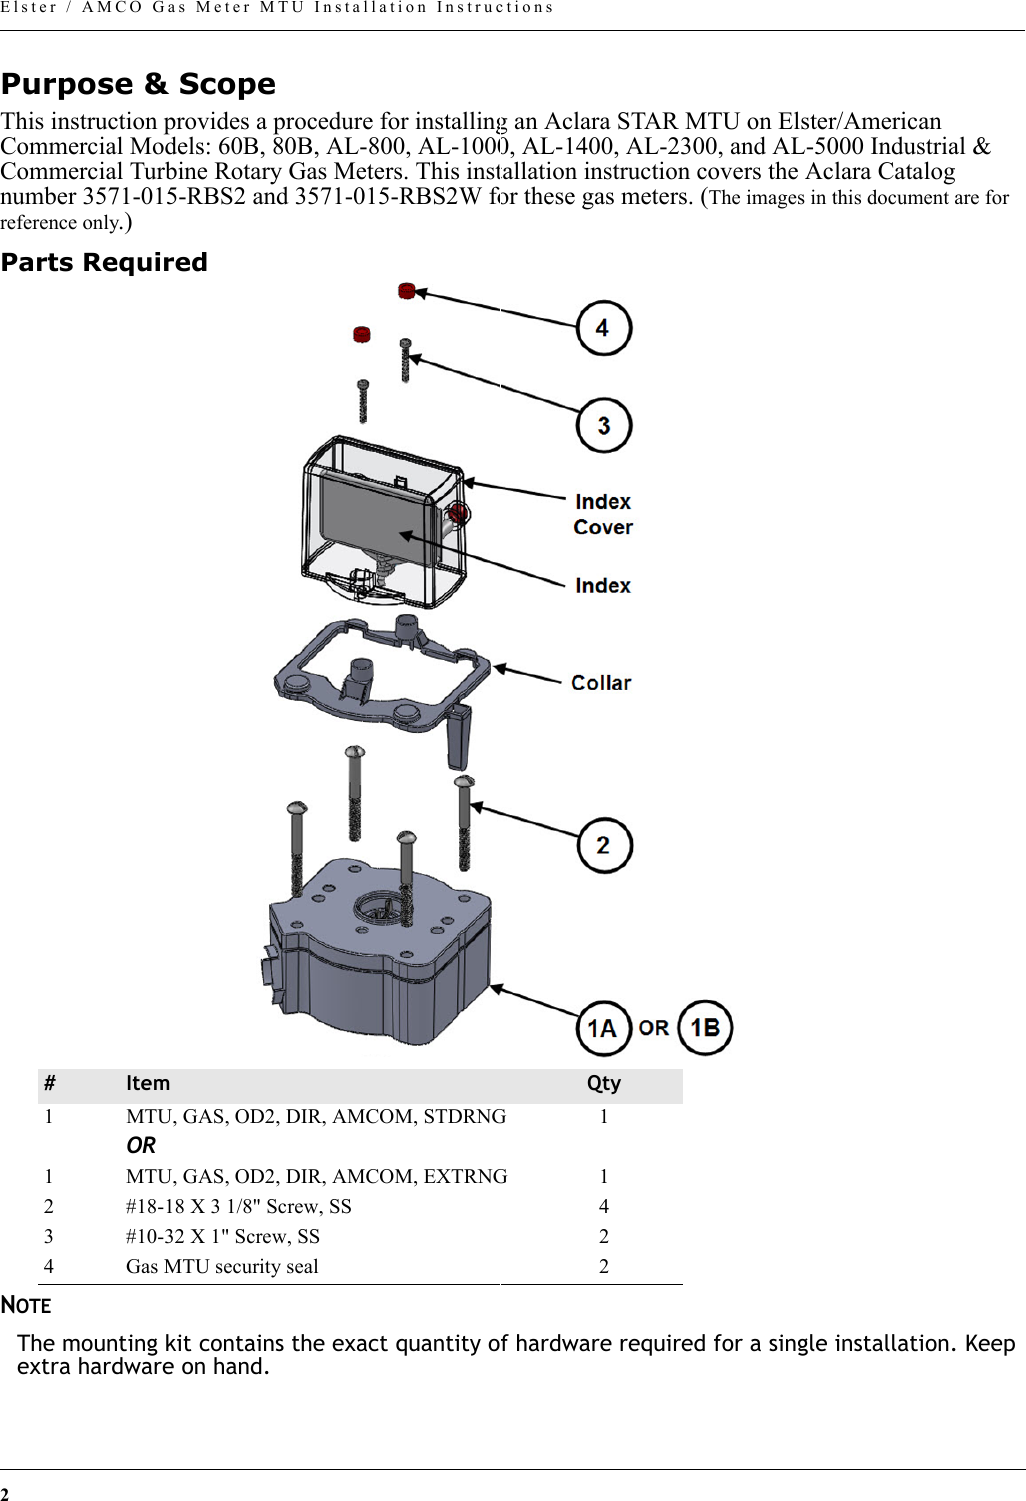 2Elster / AMCO Gas Meter MTU Installation InstructionsPurpose &amp; ScopeThis instruction provides a procedure for installing an Aclara STAR MTU on Elster/American Commercial Models: 60B, 80B, AL-800, AL-1000, AL-1400, AL-2300, and AL-5000 Industrial &amp; Commercial Turbine Rotary Gas Meters. This installation instruction covers the Aclara Catalog number 3571-015-RBS2 and 3571-015-RBS2W for these gas meters. (The images in this document are for reference only.)Parts RequiredNOTE The mounting kit contains the exact quantity of hardware required for a single installation. Keep extra hardware on hand.#Item Qty1 MTU, GAS, OD2, DIR, AMCOM, STDRNG  1OR1 MTU, GAS, OD2, DIR, AMCOM, EXTRNG 12 #18-18 X 3 1/8&quot; Screw, SS 43 #10-32 X 1&quot; Screw, SS 24 Gas MTU security seal 2